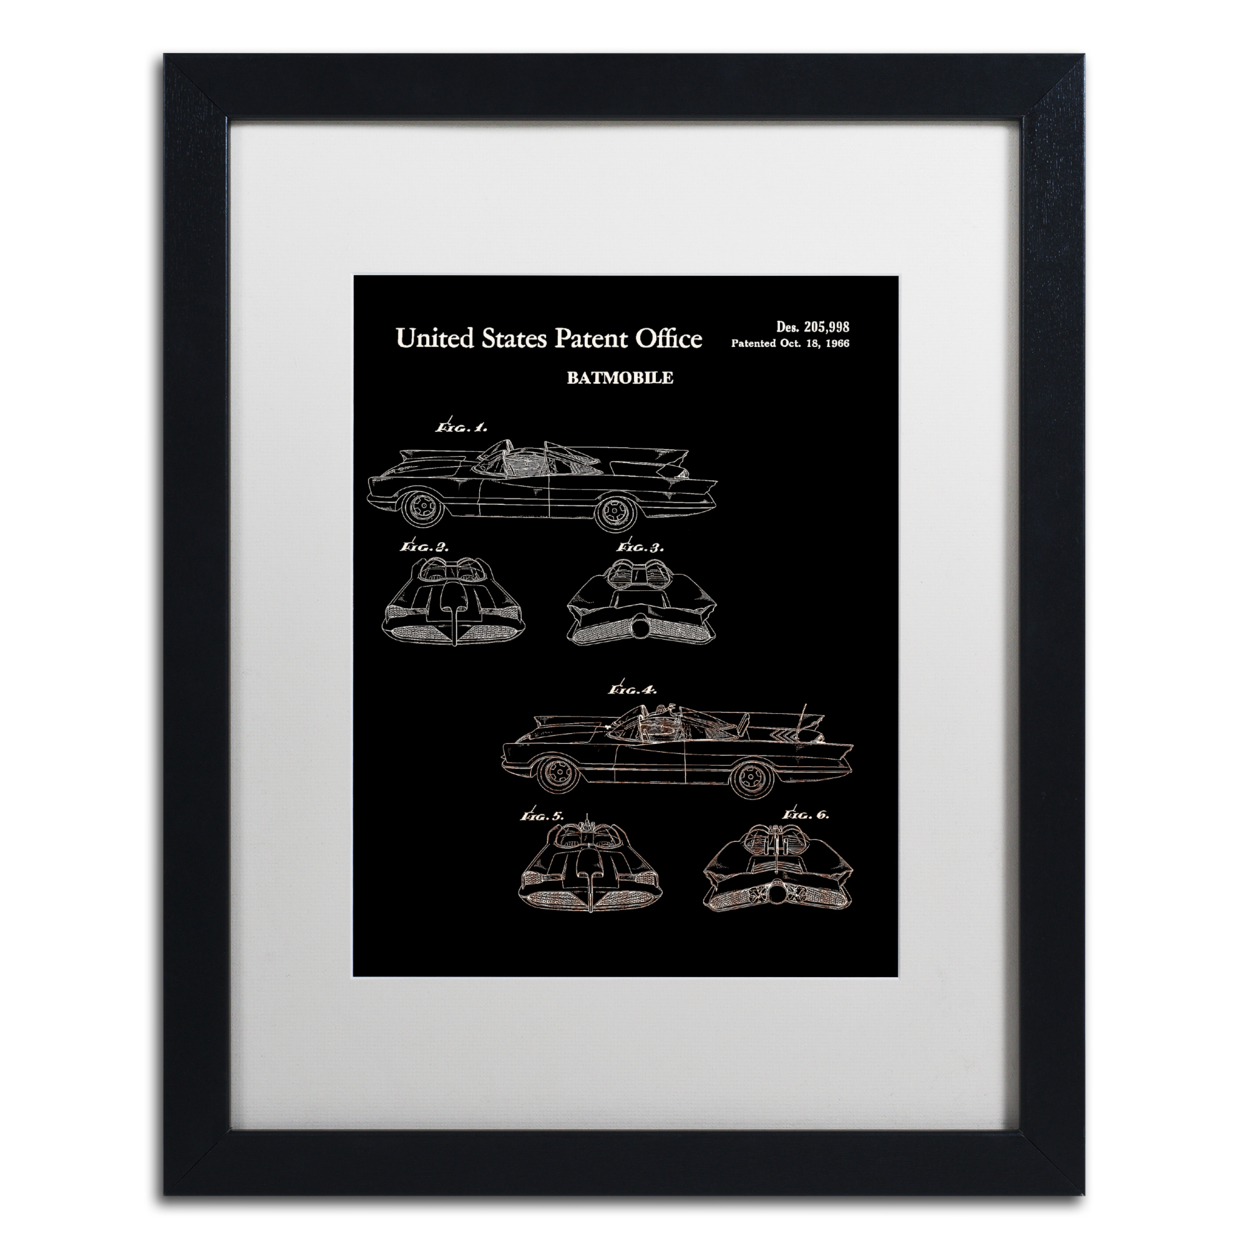 Claire Doherty 'Batmobile Car Patent 1966 Black' Black Wooden Framed Art 18 X 22 Inches